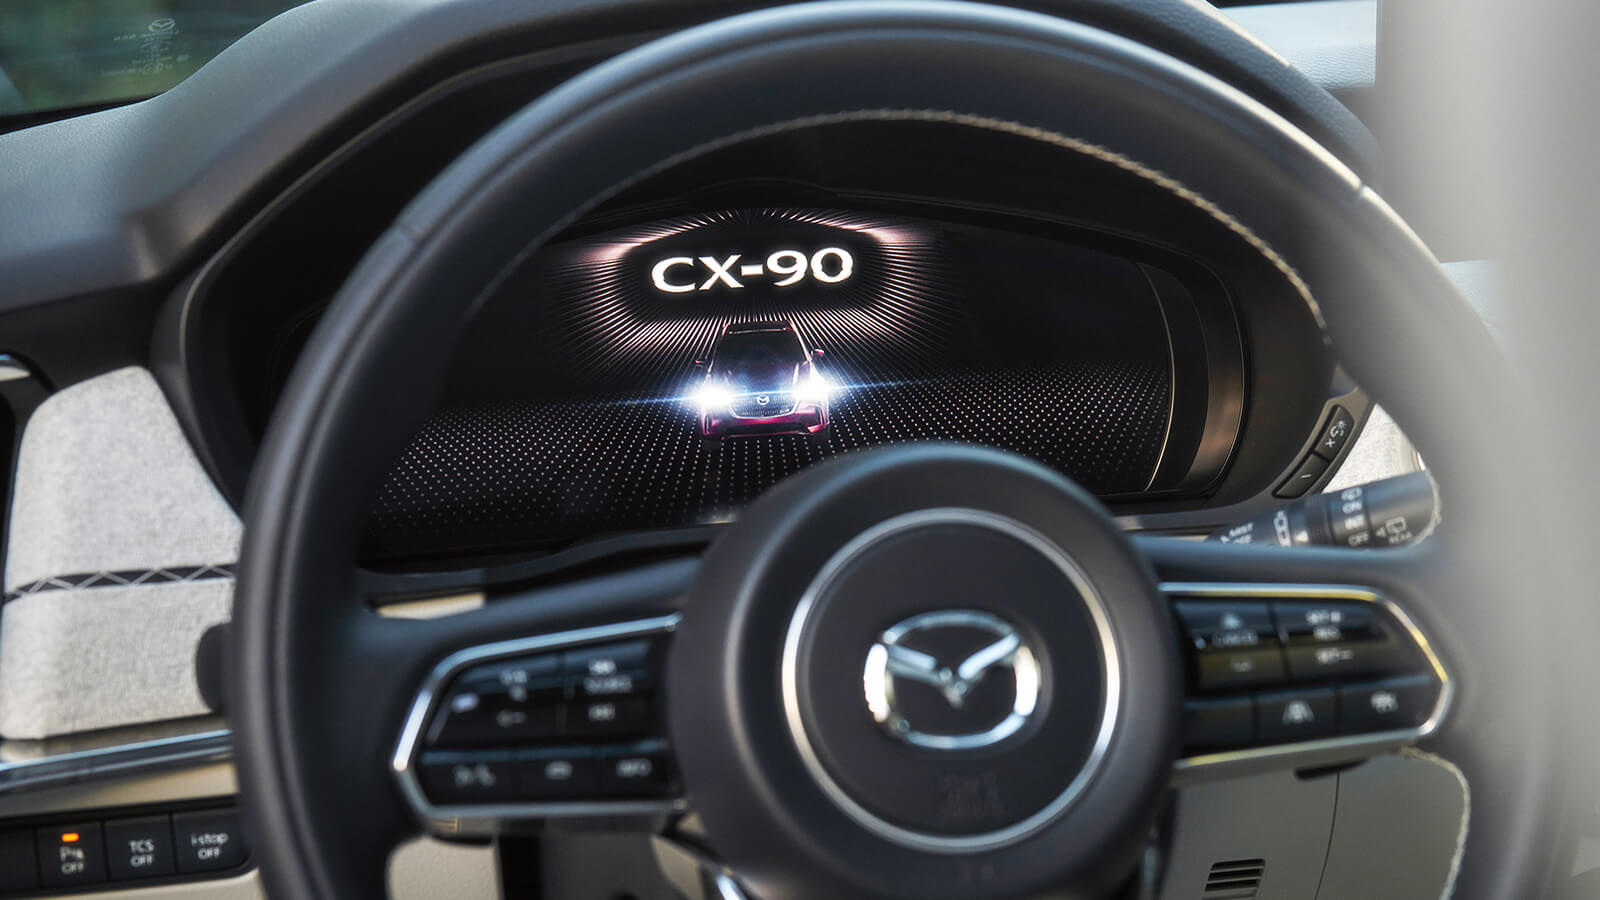 Each cutting-edge technology curated for the CX-90 provides a deeper sense of focus. From larger than ever displays to new and improved driver centric tools, the all-new CX-90 effortlessly connects you to your journey. 